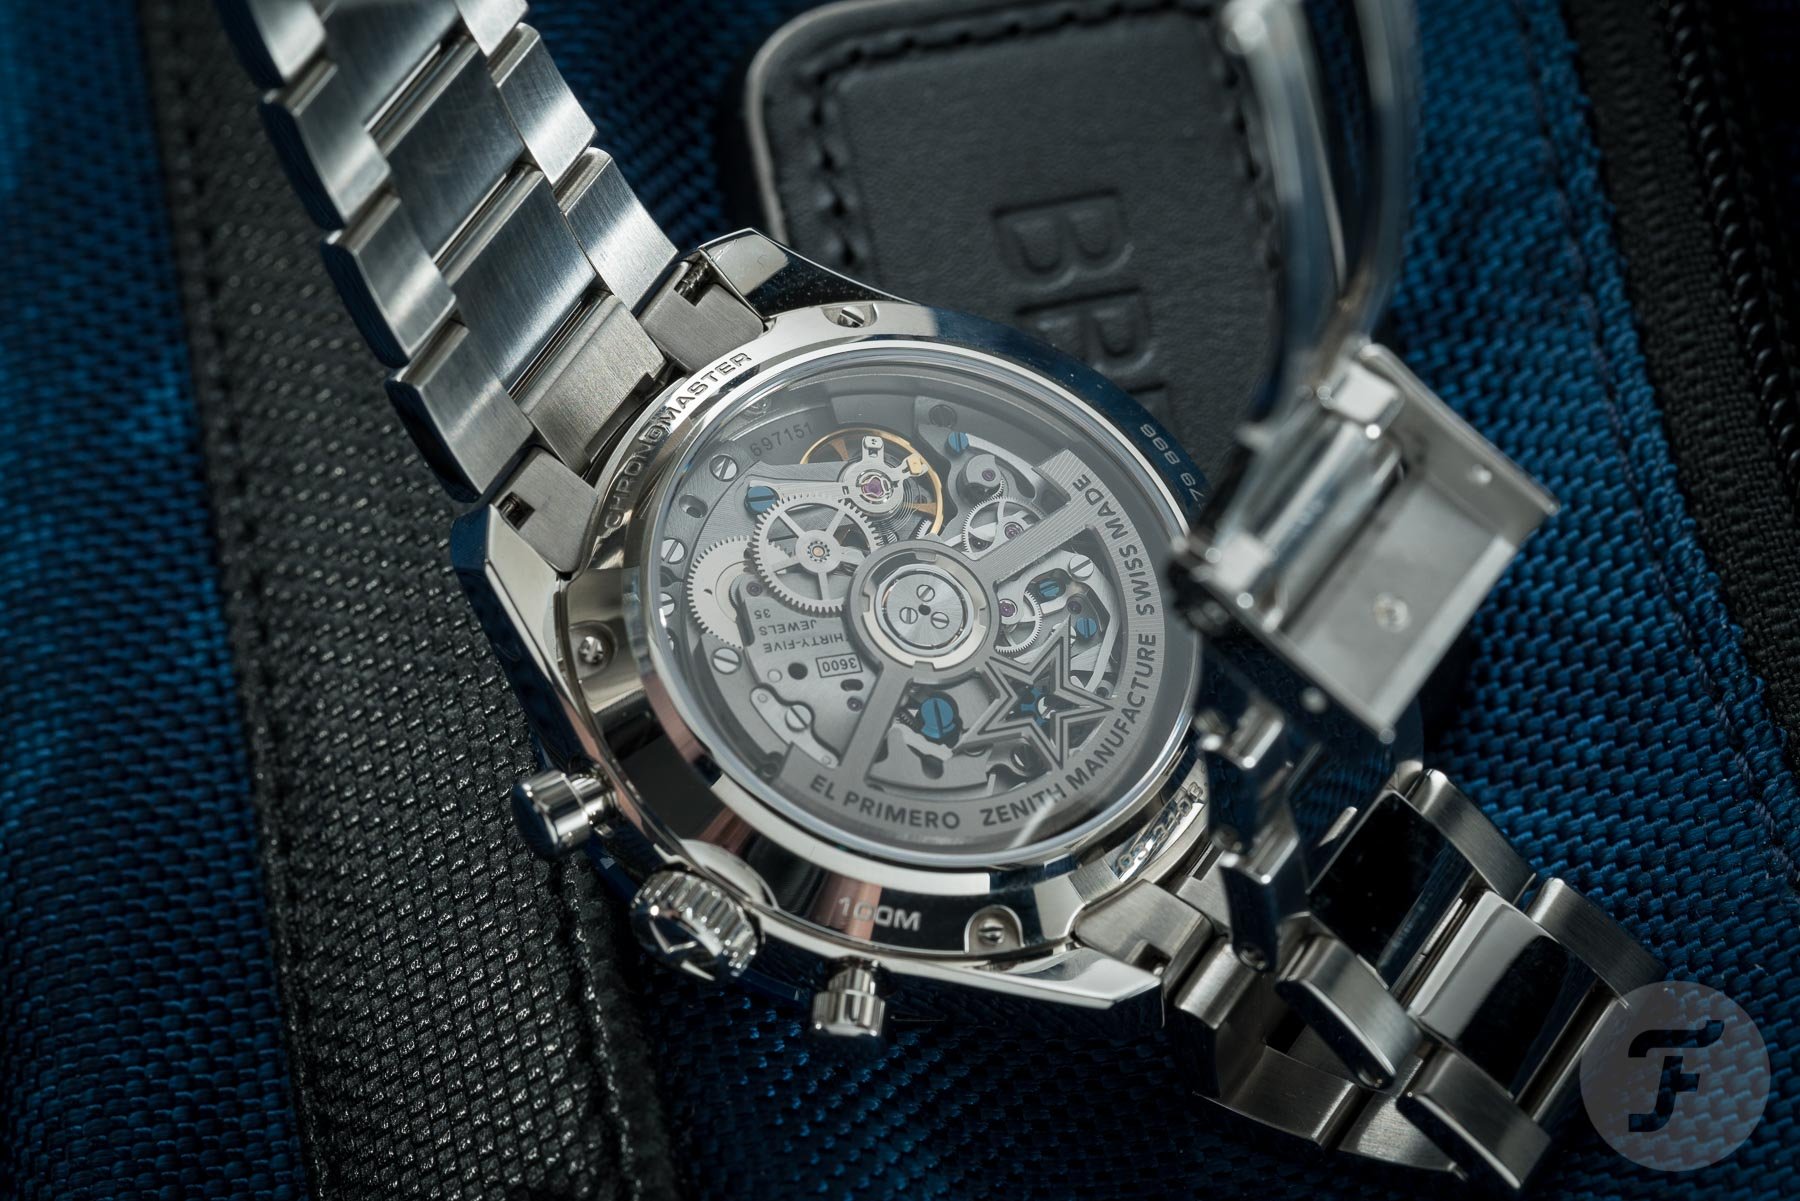 Master of Precision: Hands-On With the Zenith Chronomaster Sport